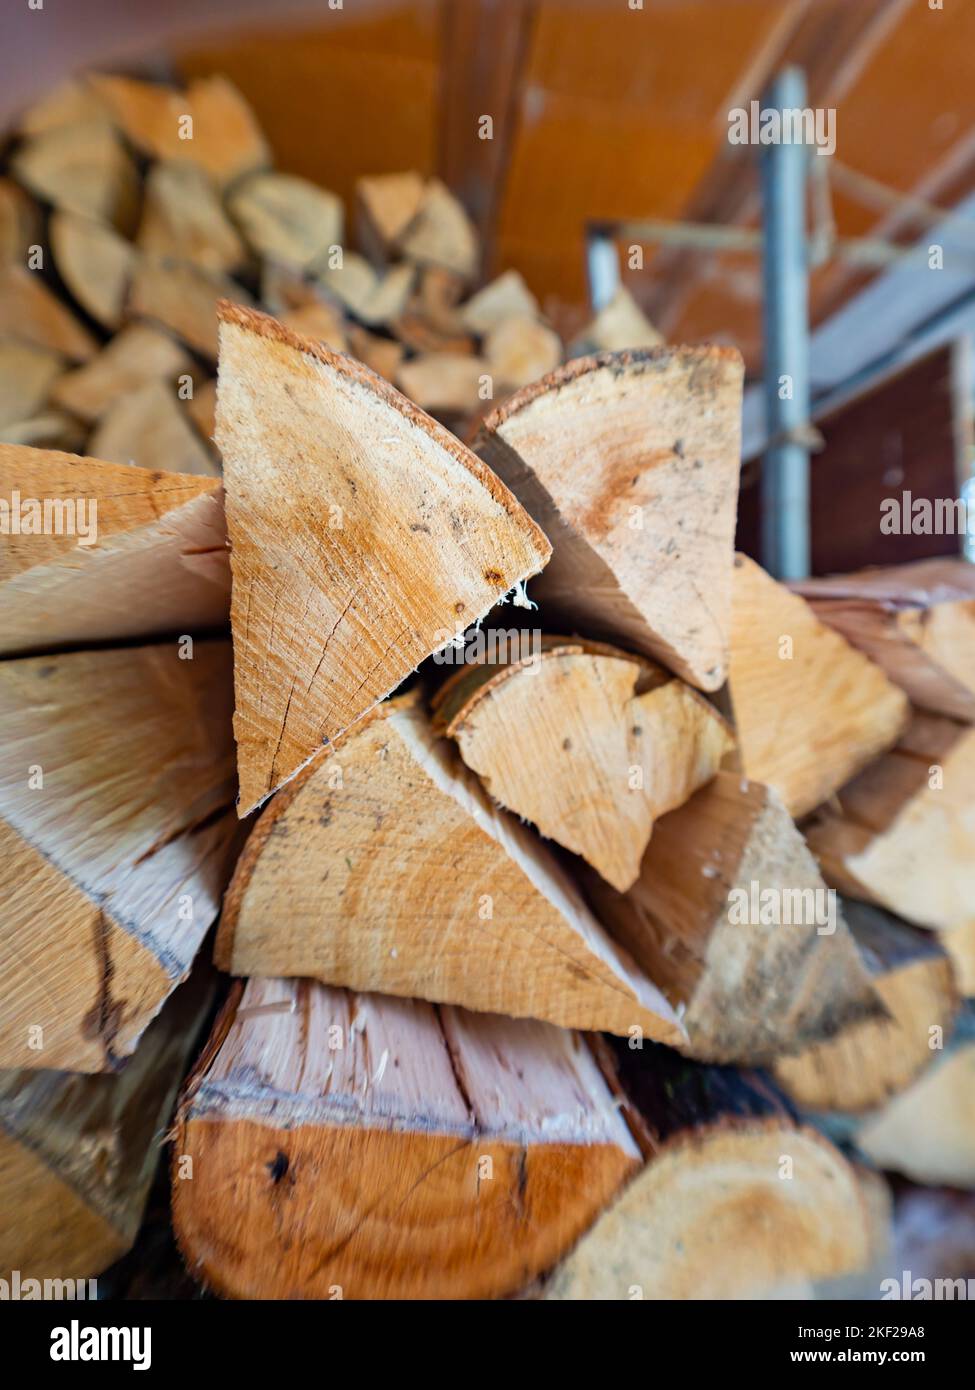 Piled wooden logs partitioned small parts cut Stock Photo